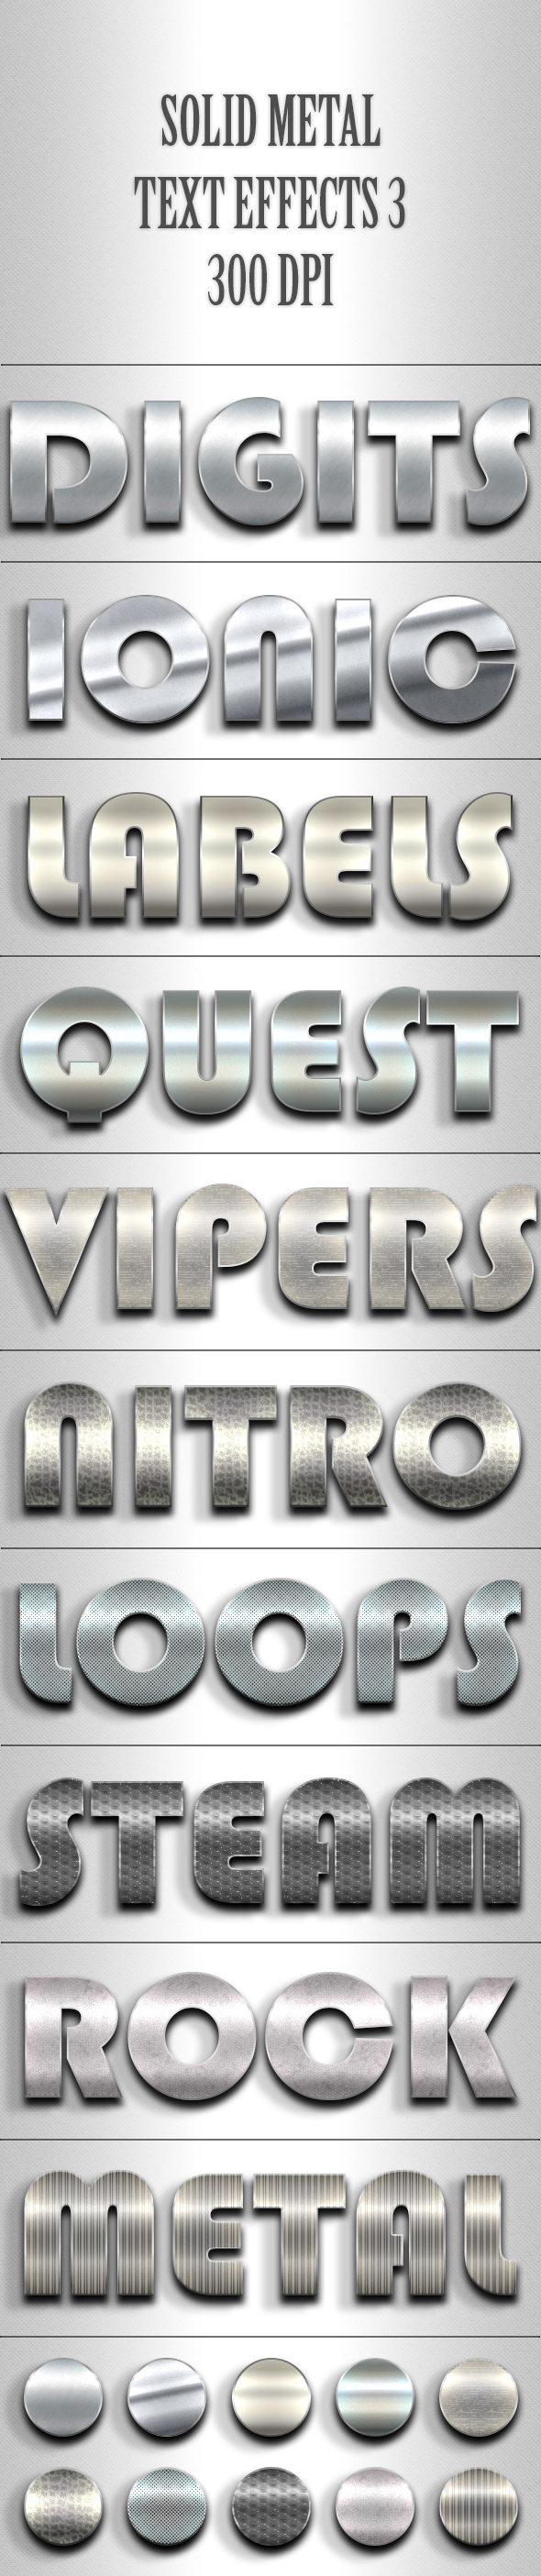 Solid Metal Text Effects 3